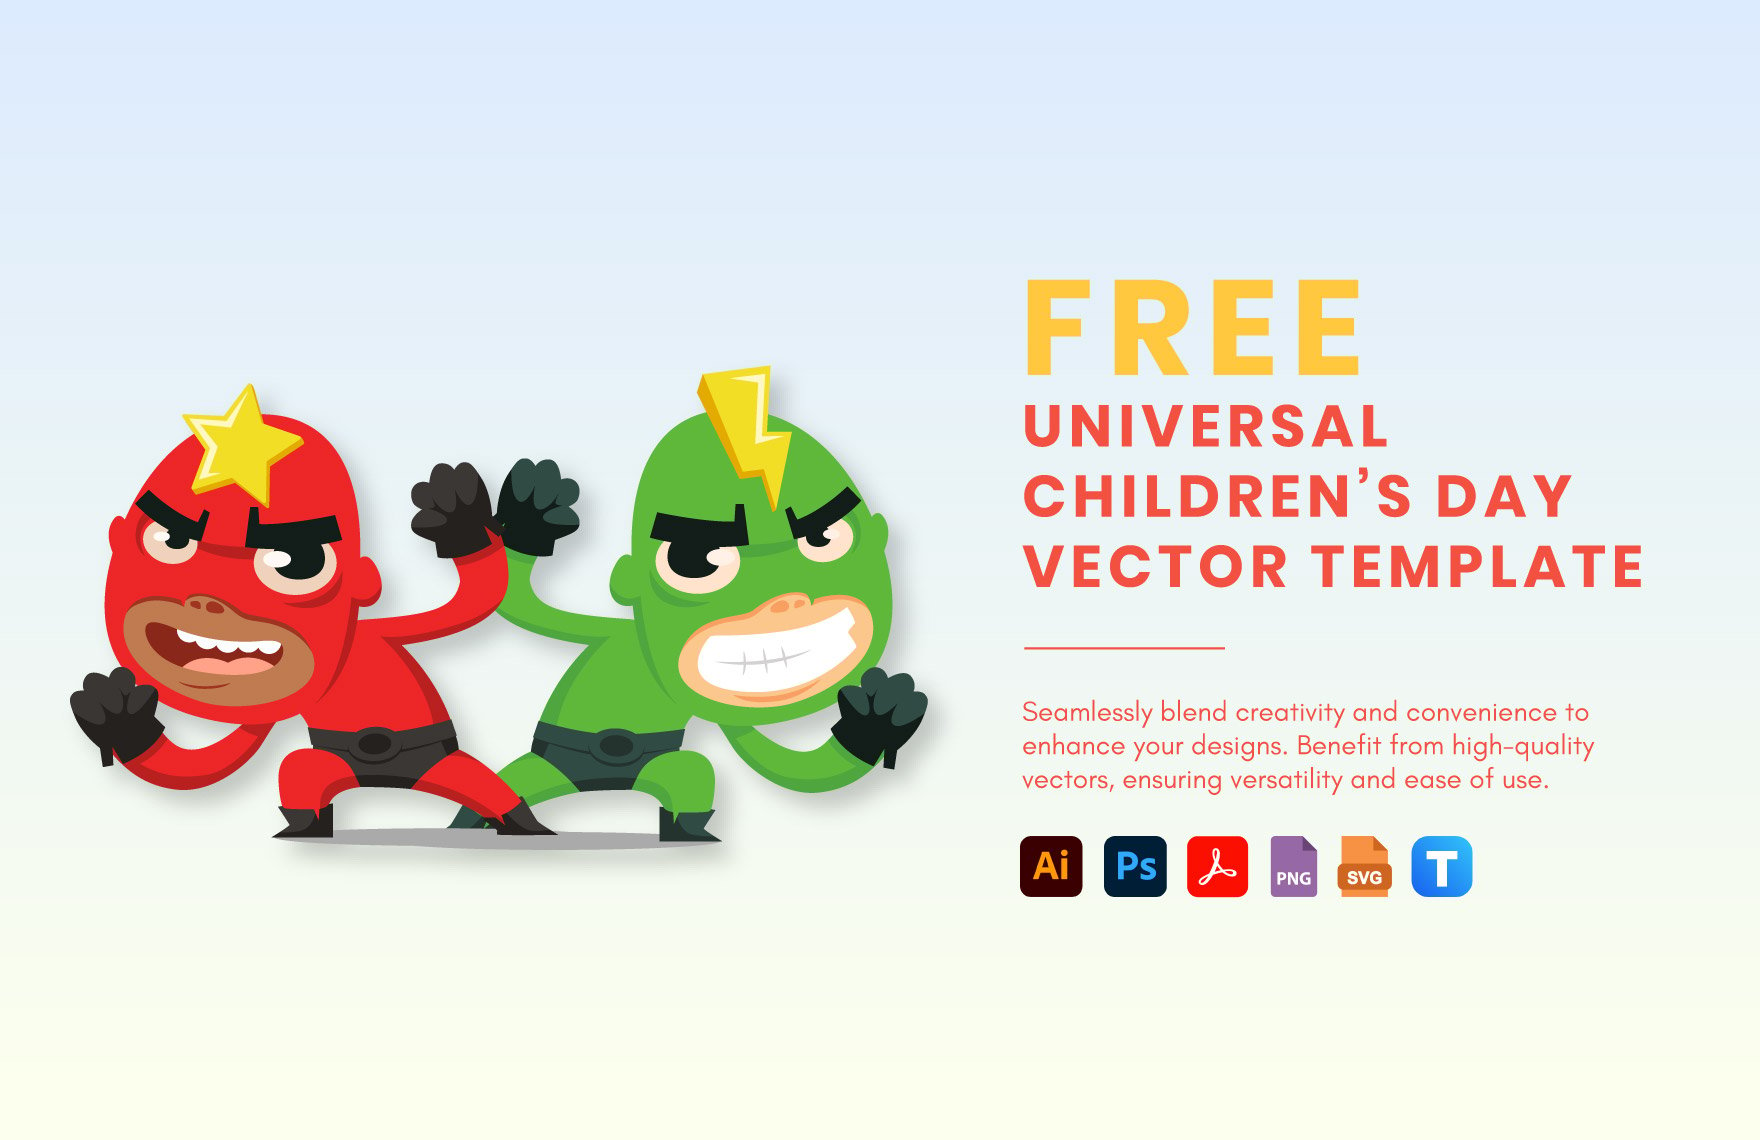 Free Universal Children’s Day Vector in PDF, Illustrator, PSD, SVG, PNG